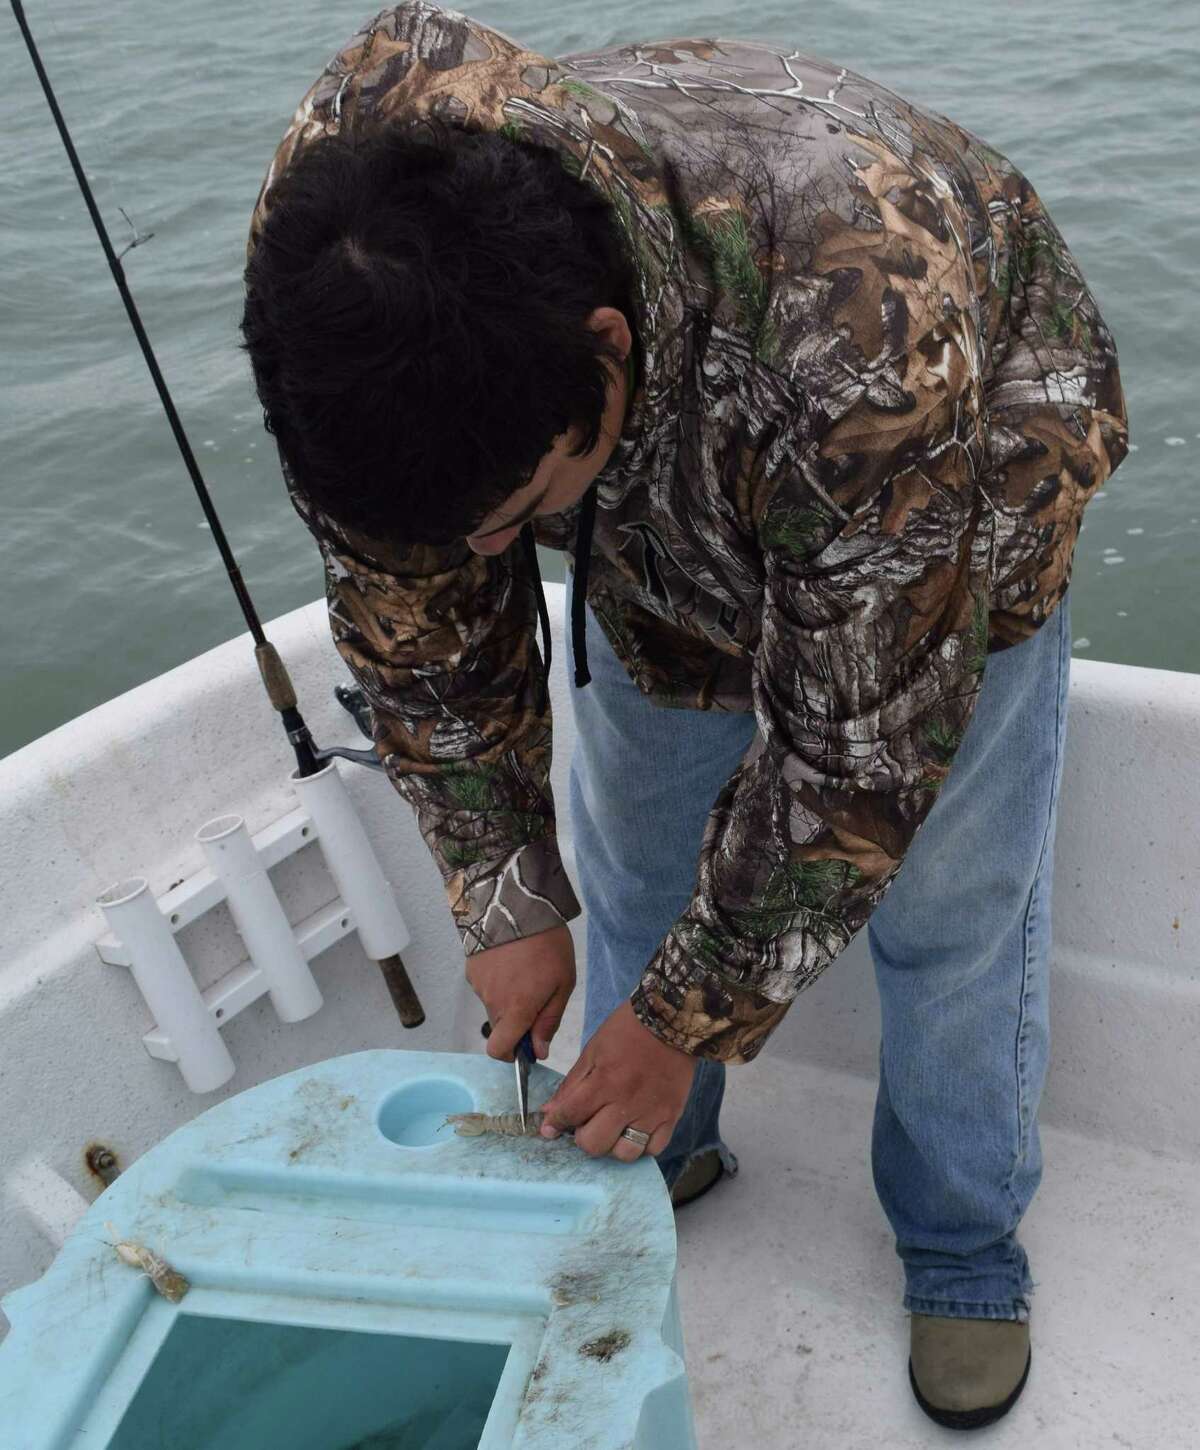 Capt. Aerich Oliver of Redfish Charters cuts up a sea lice for big black drum bait using a technique he has developed during 15 years of fishing experience under the tutelage of veteran Guide Charlie Newton.